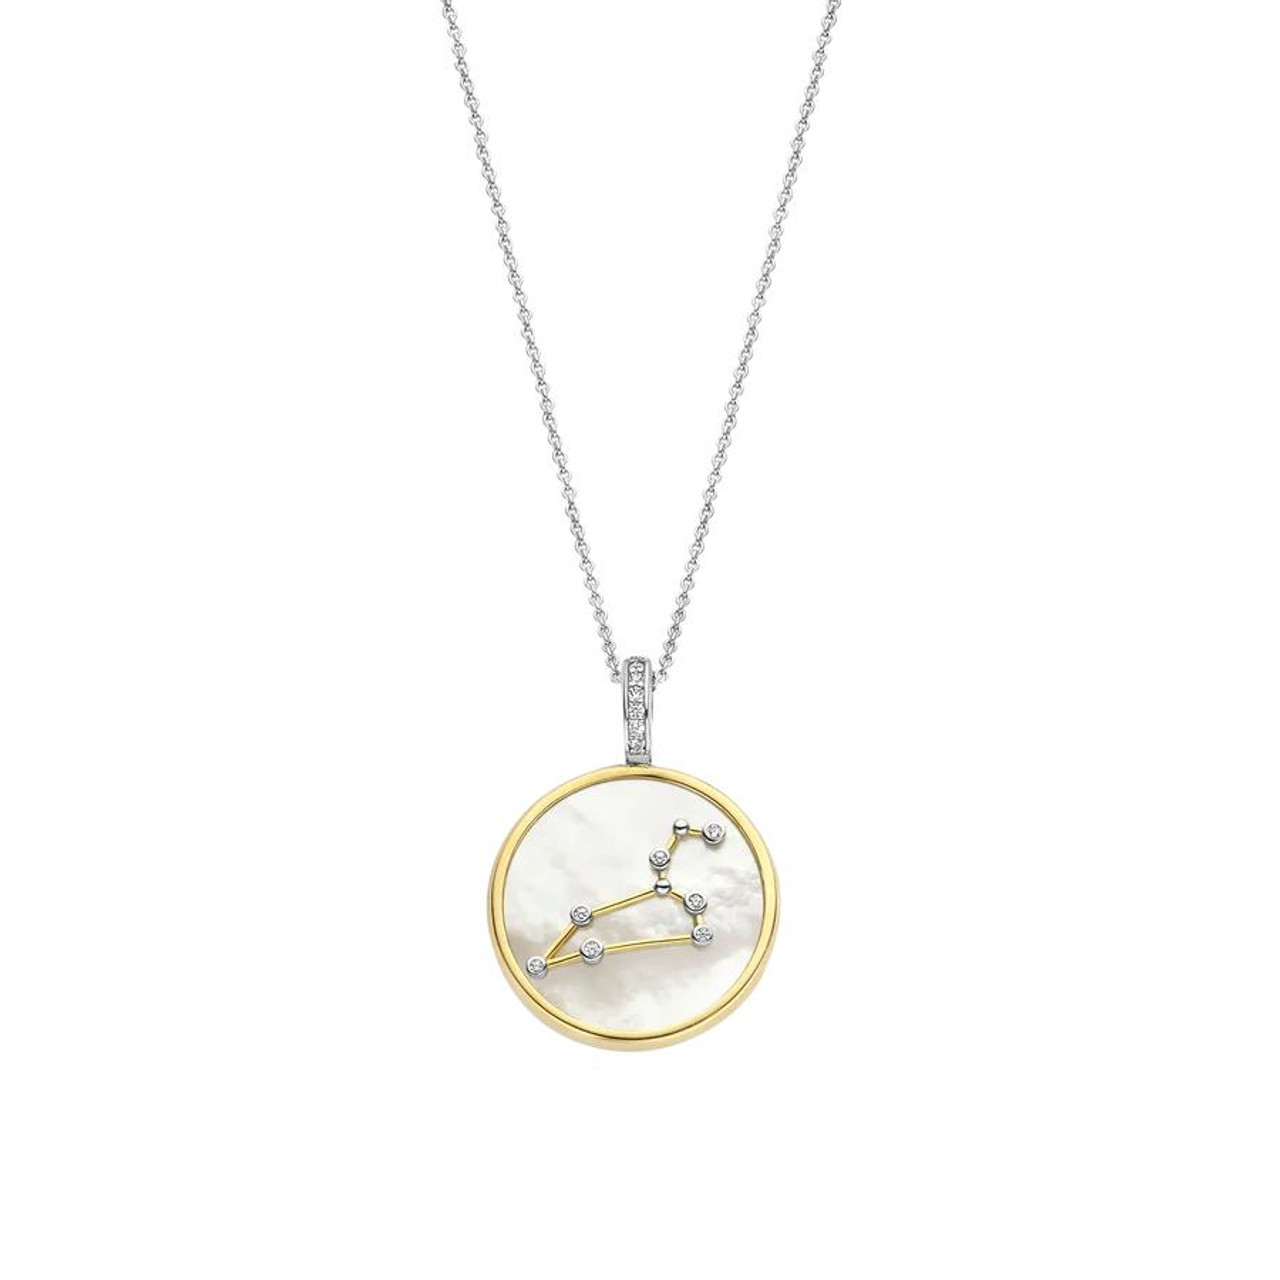 Leo celestial zodiac necklace, exclusively at 12th HOUSE